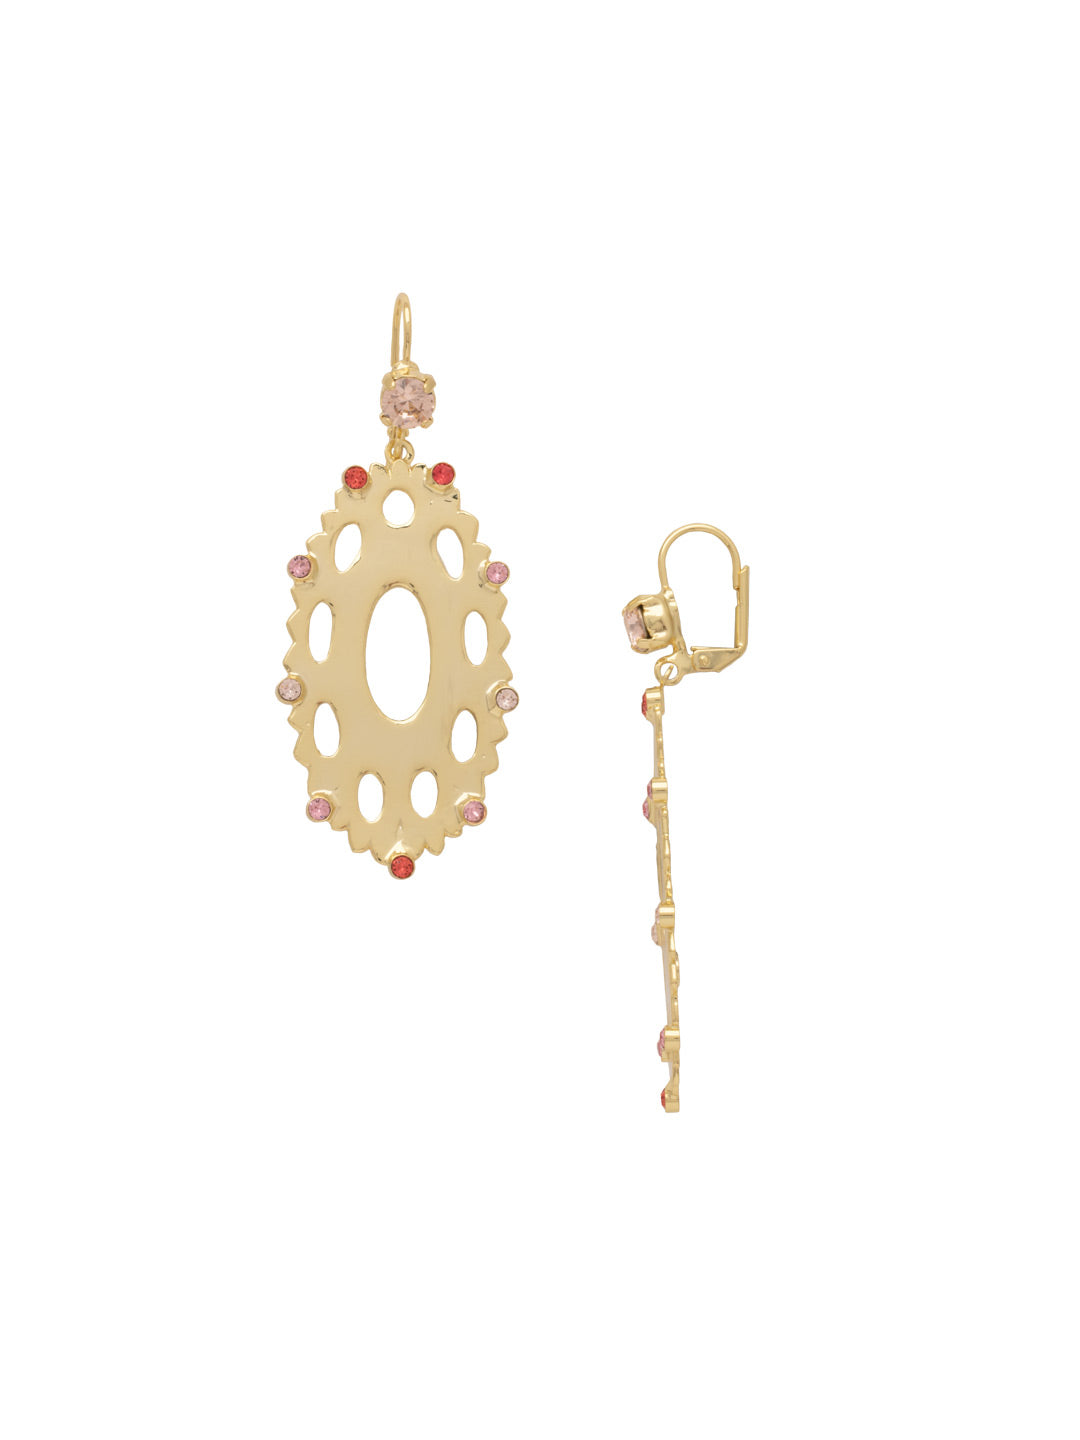 Queen of Hearts Statement Earrings - EFE3BGFSK - <p>The Queen of Hearts Statement Earrings feature an oversized metal disk with delicate carvings and embellished crystals, dangling from a lever back French wire. From Sorrelli's First Kiss collection in our Bright Gold-tone finish.</p>